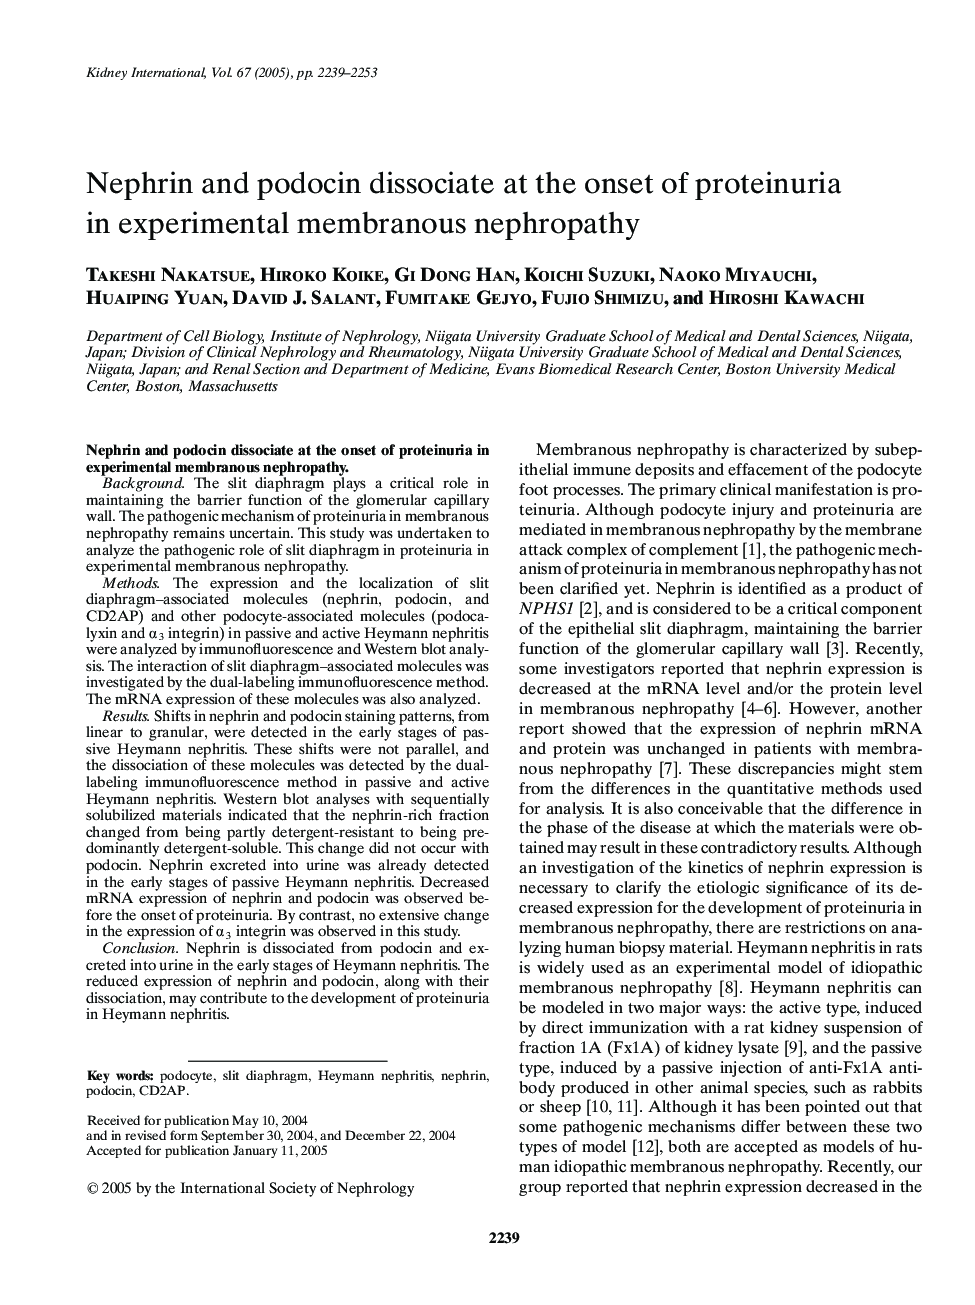 Nephrin and podocin dissociate at the onset of proteinuria in experimental membranous nephropathy